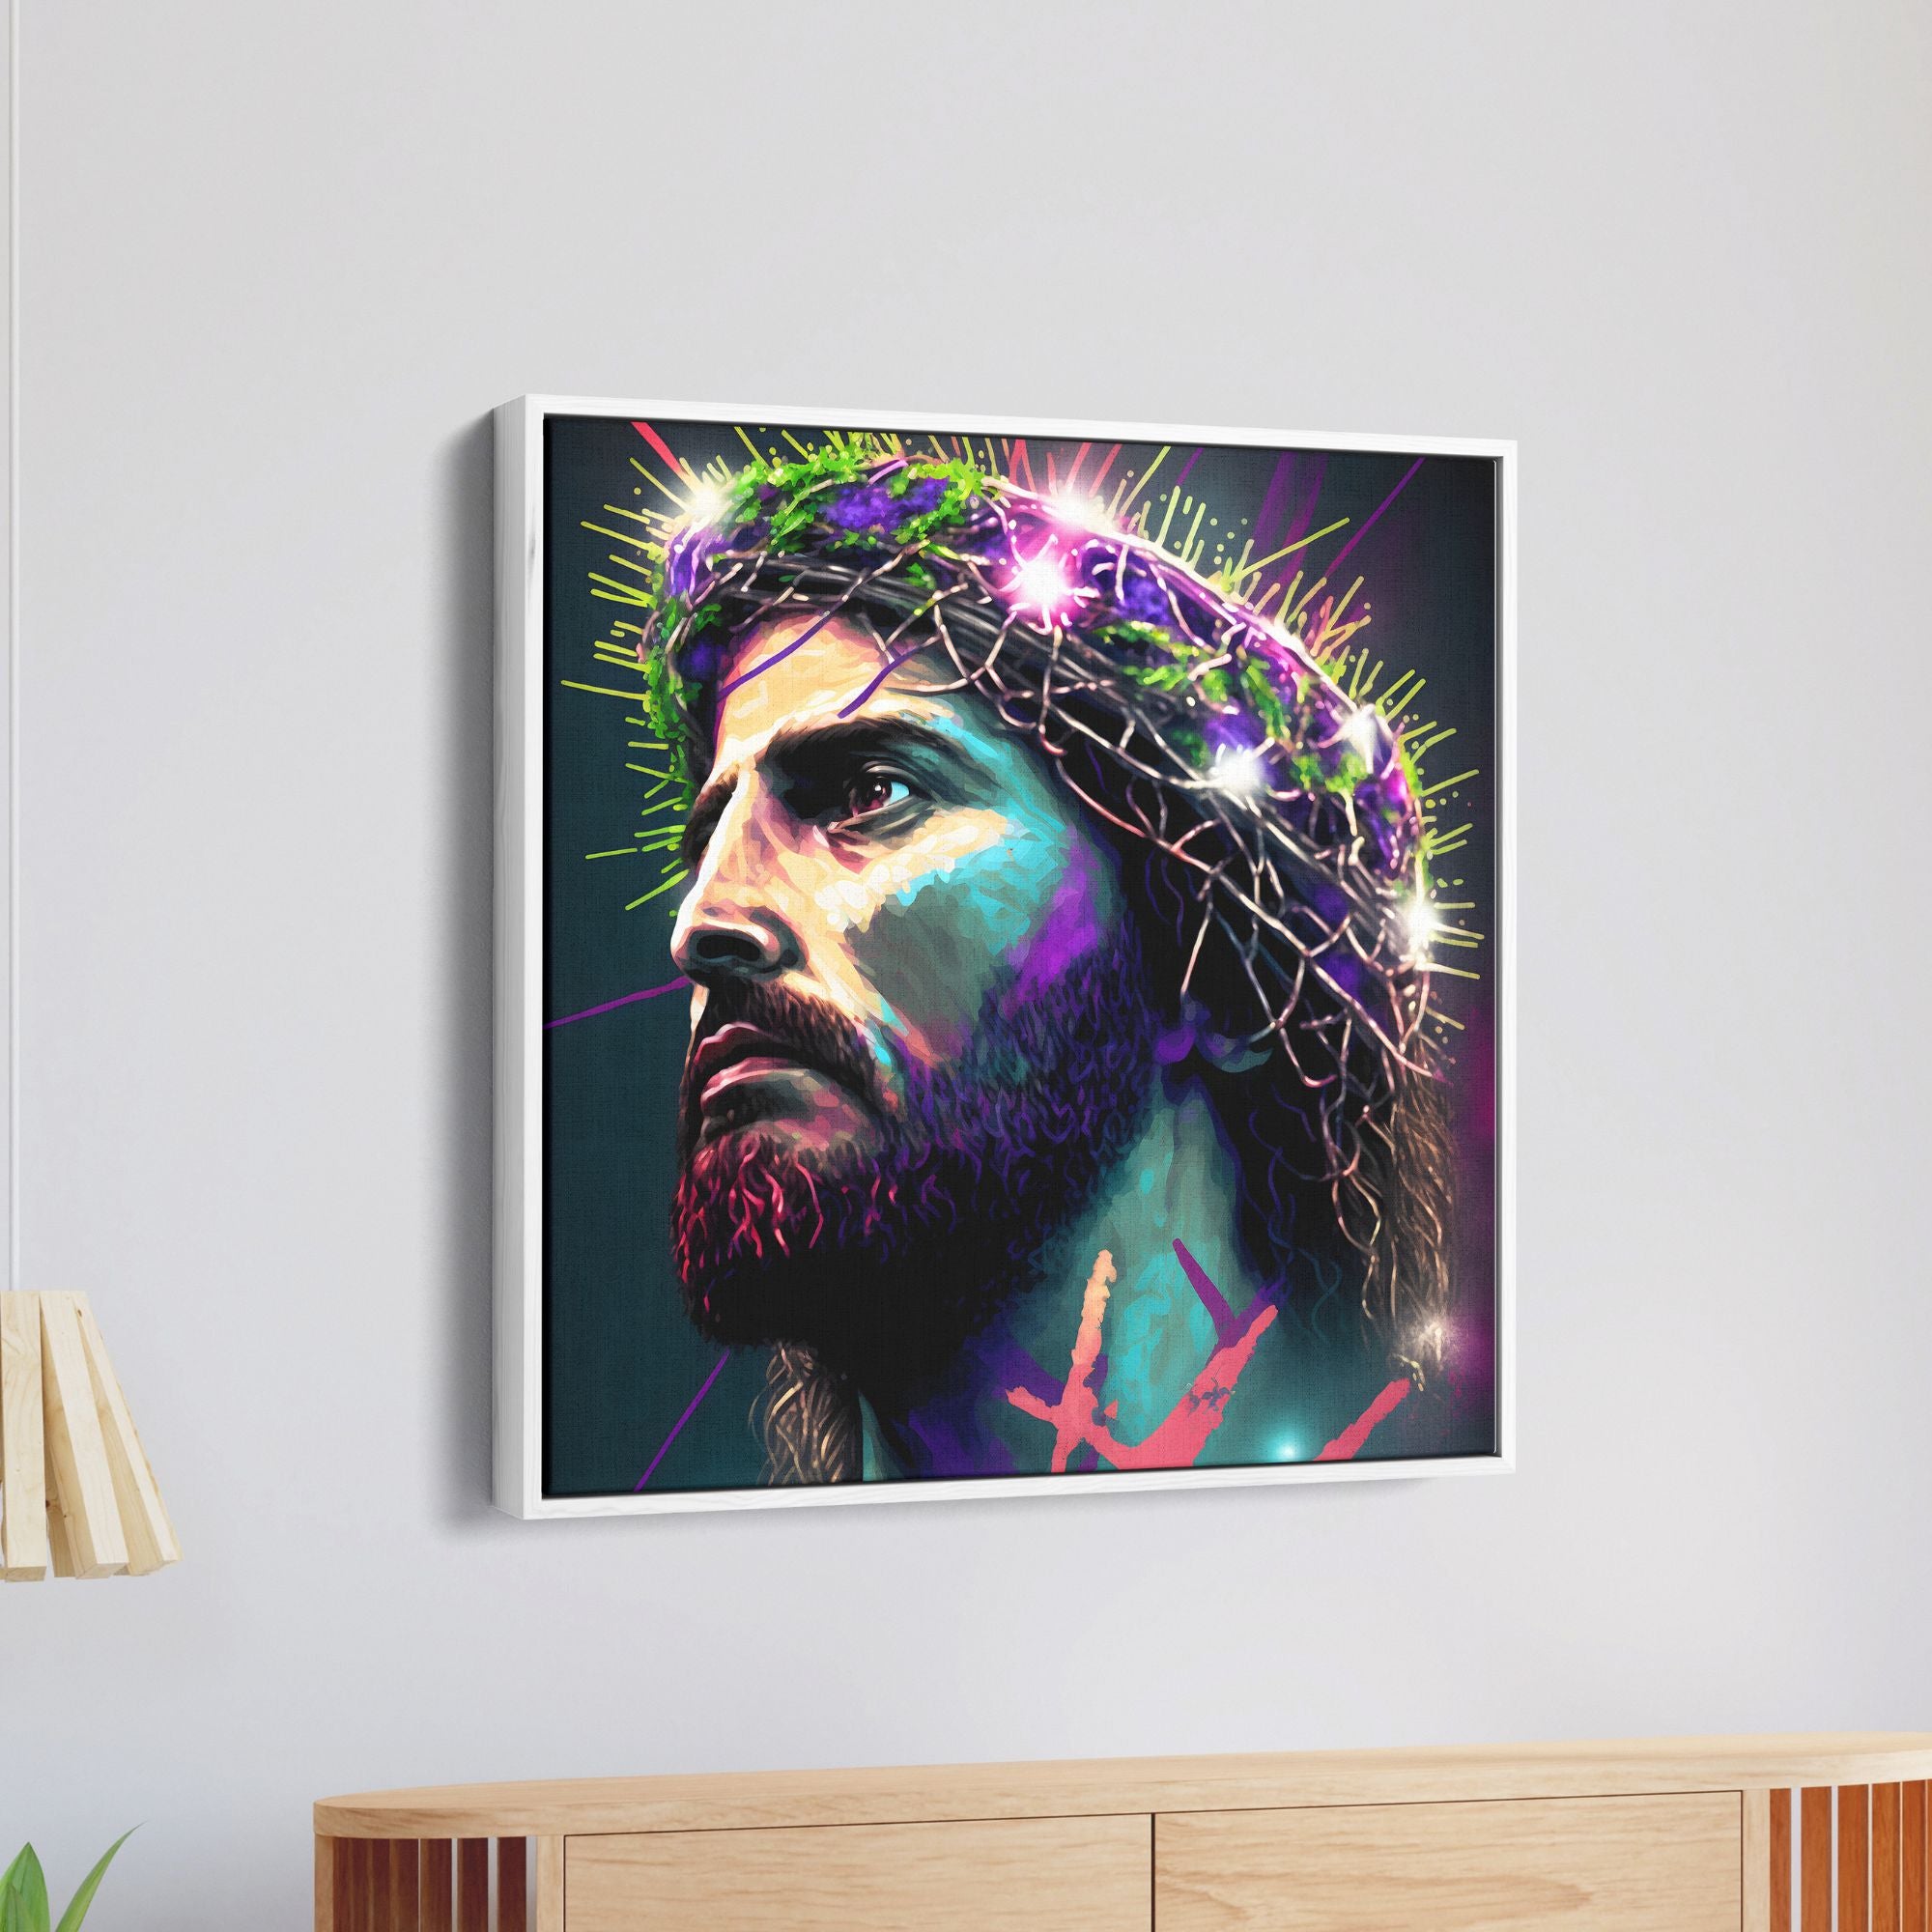 Colorful Jesus Face With Lighting Crown On Head Canvas Wall Painting